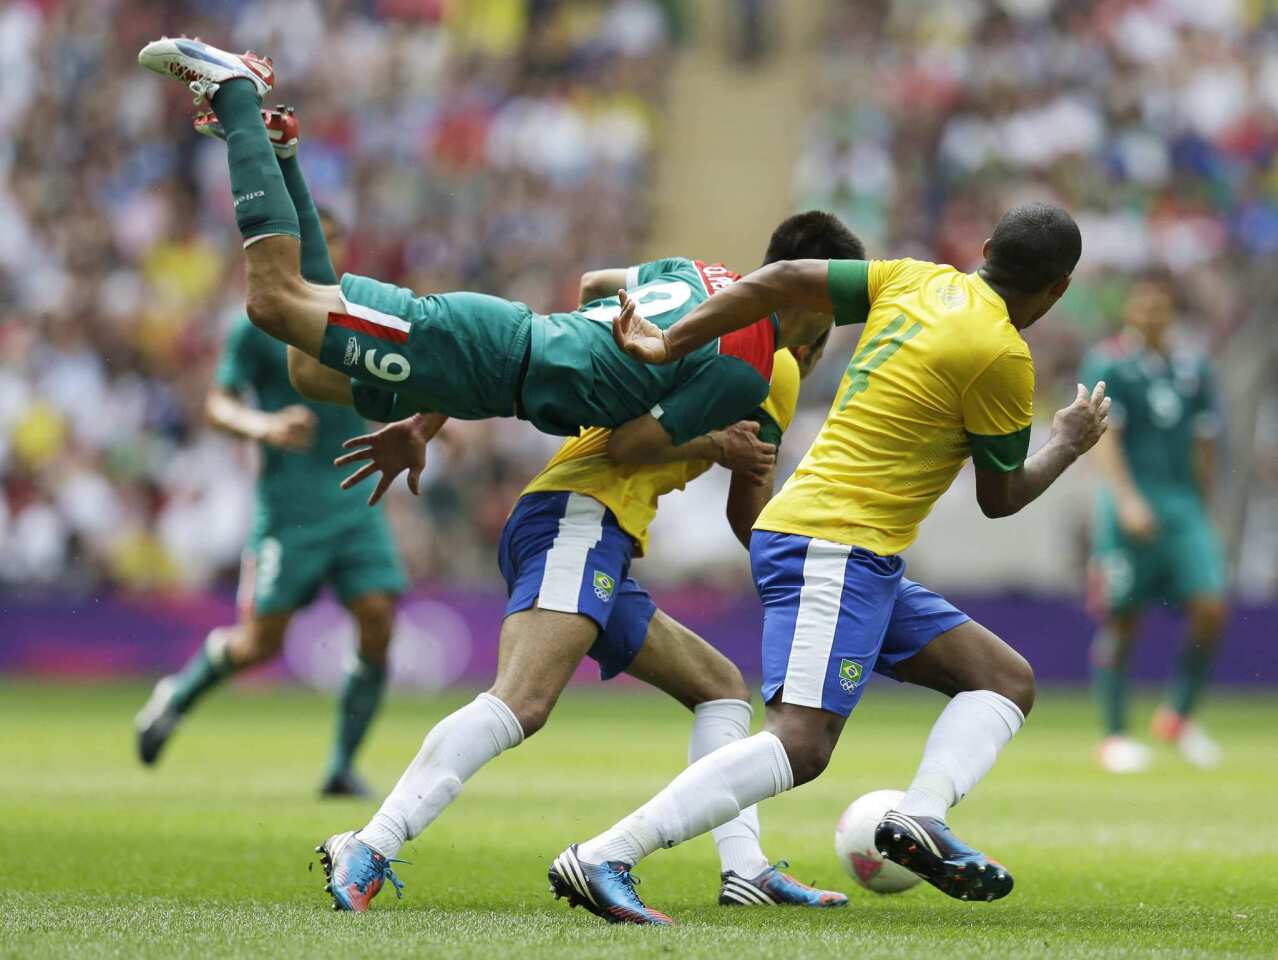 Mexico's Oribe Peralta goes airborne in front of Brazil's Juan Jesus, right, in the Olympic finals.